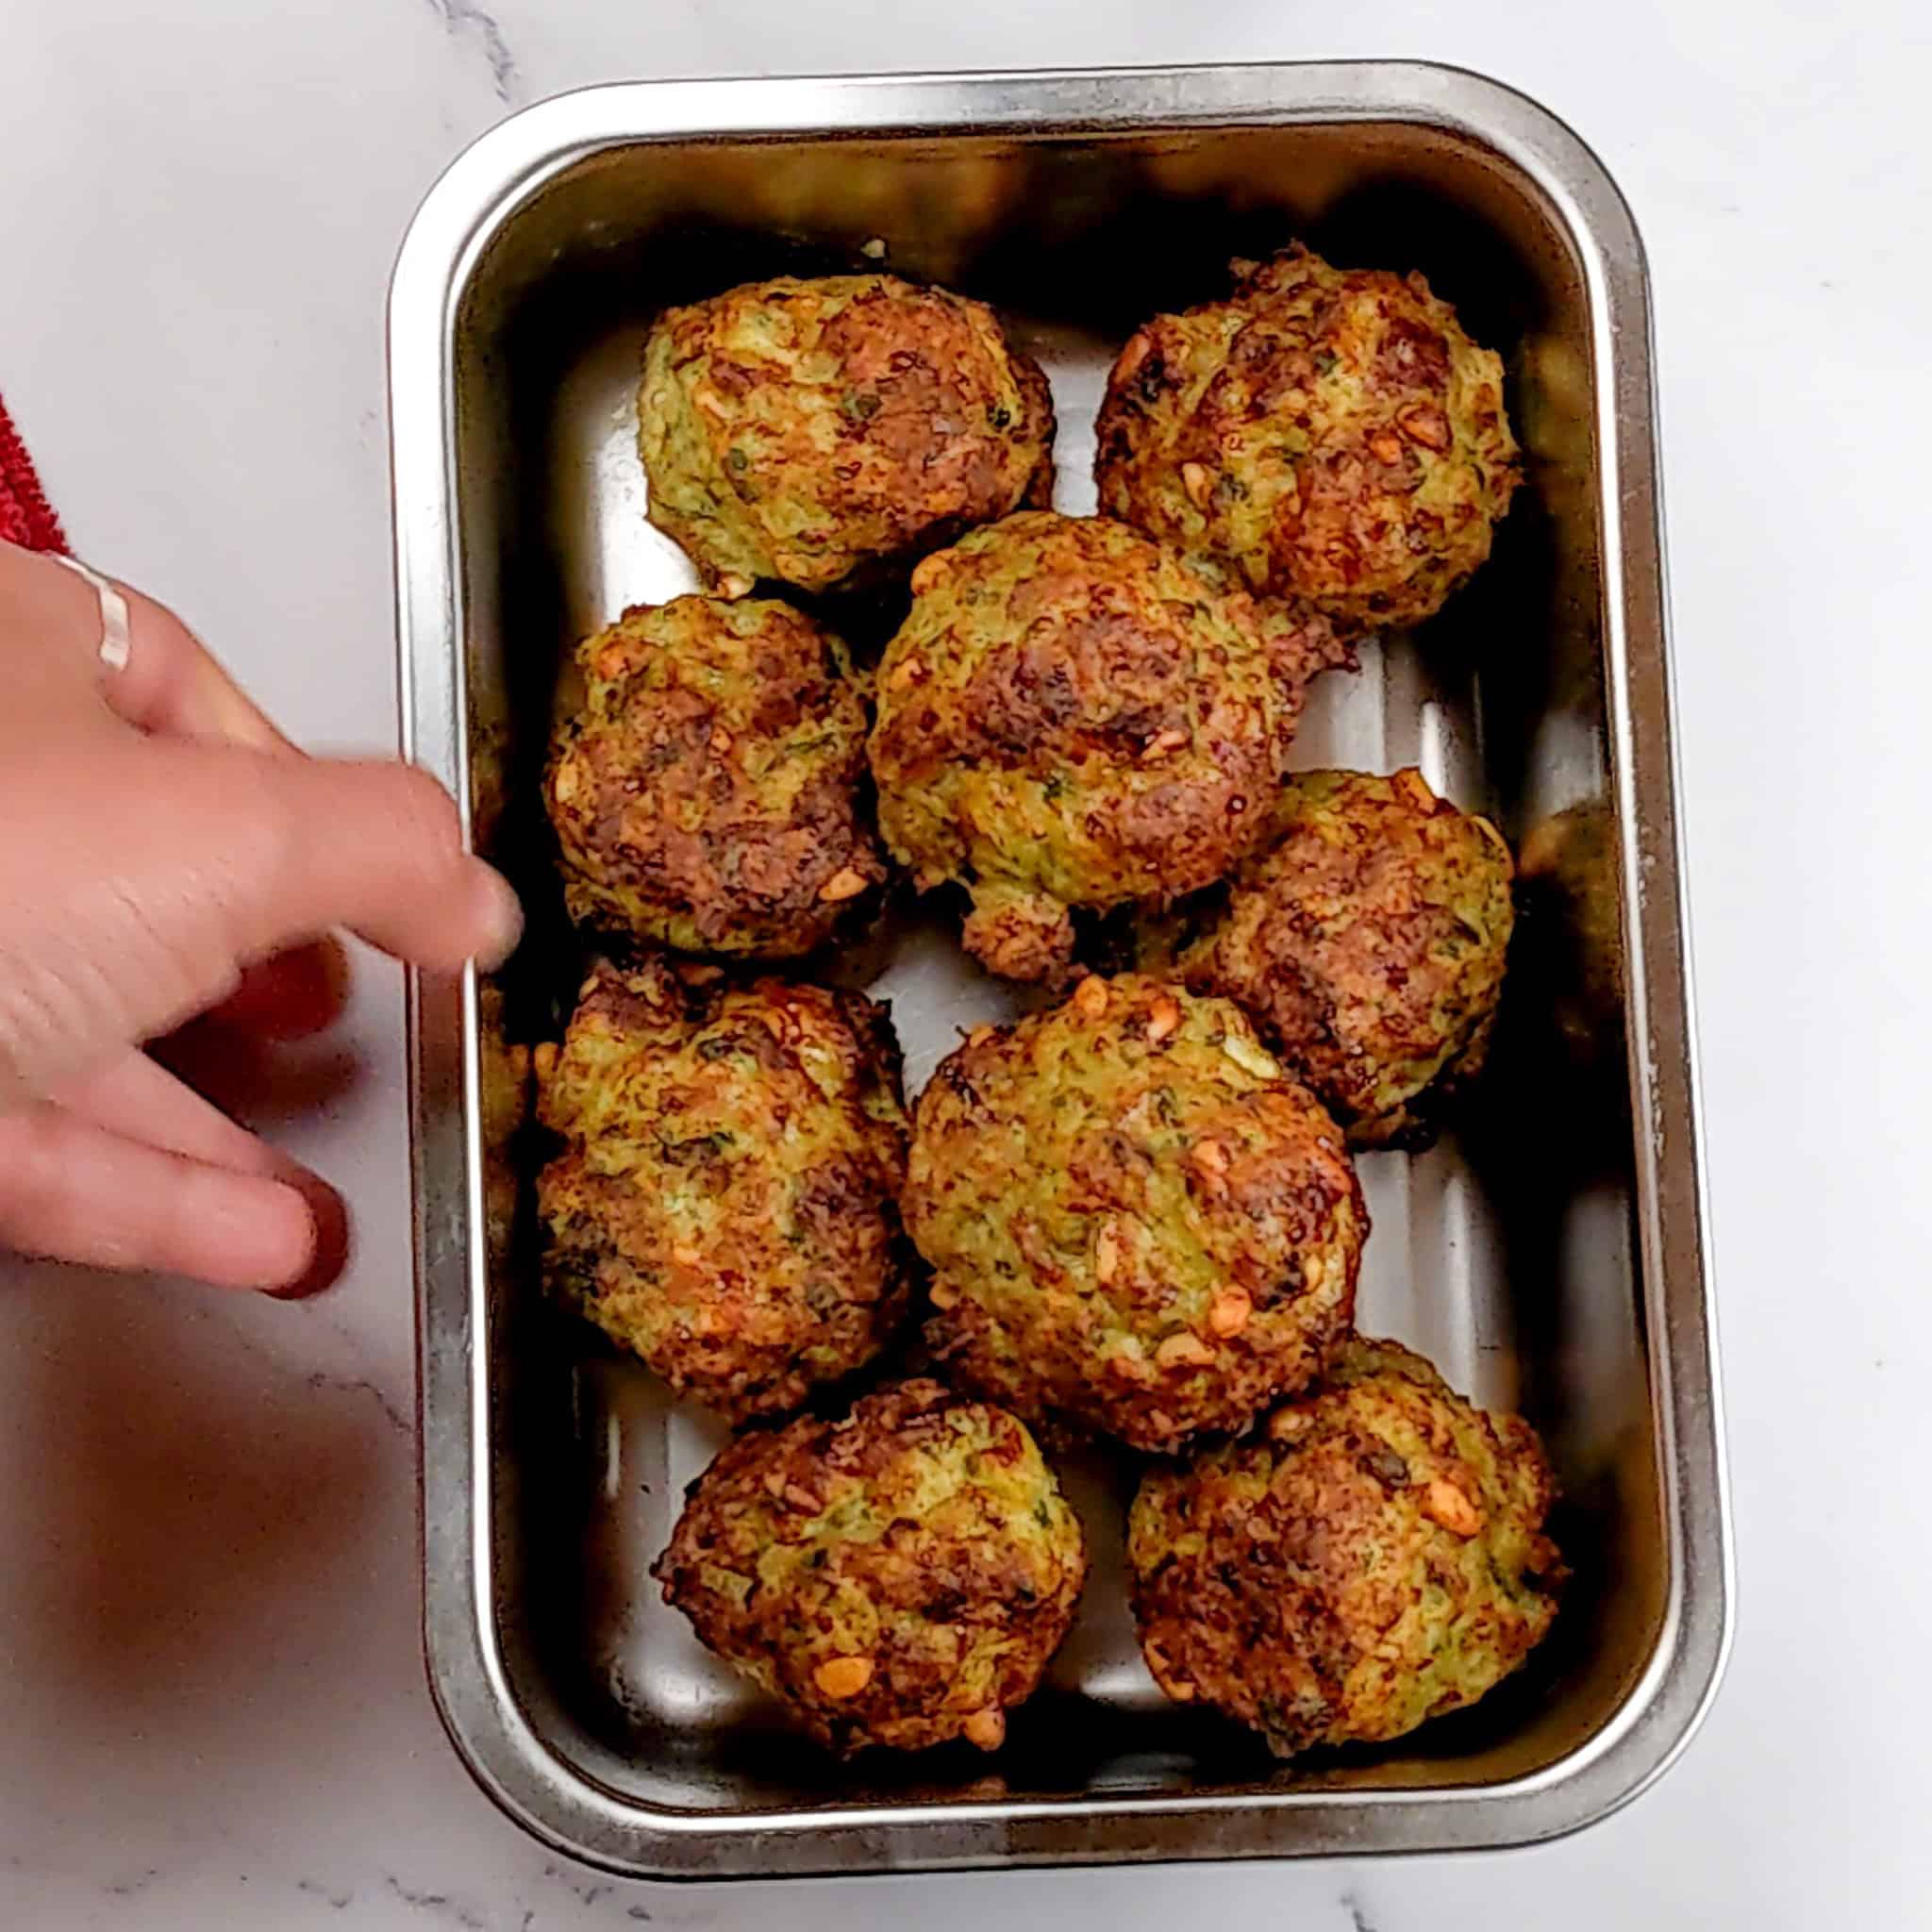 cooked golden brown meatballs piled in a rectangle metal container.